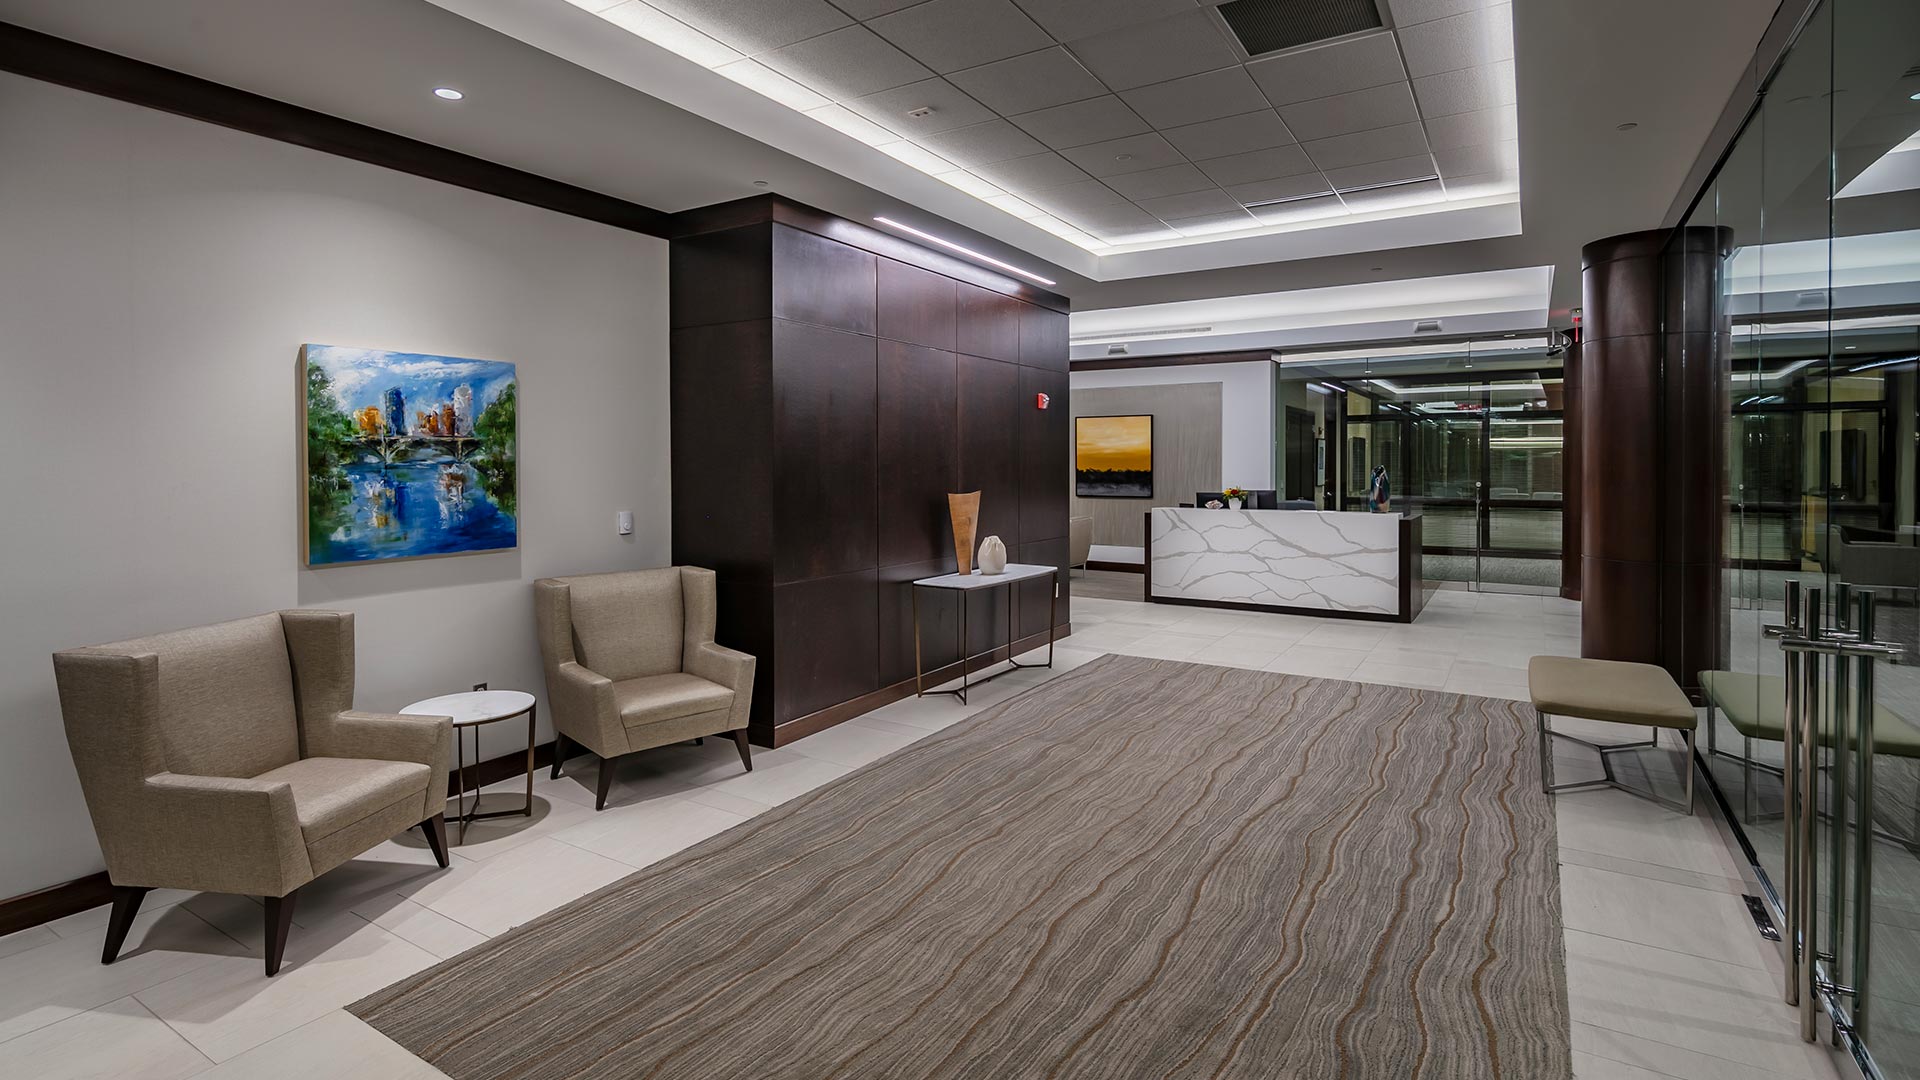 Mercantile Bank Corporate Office – Projects | Rockford Construction